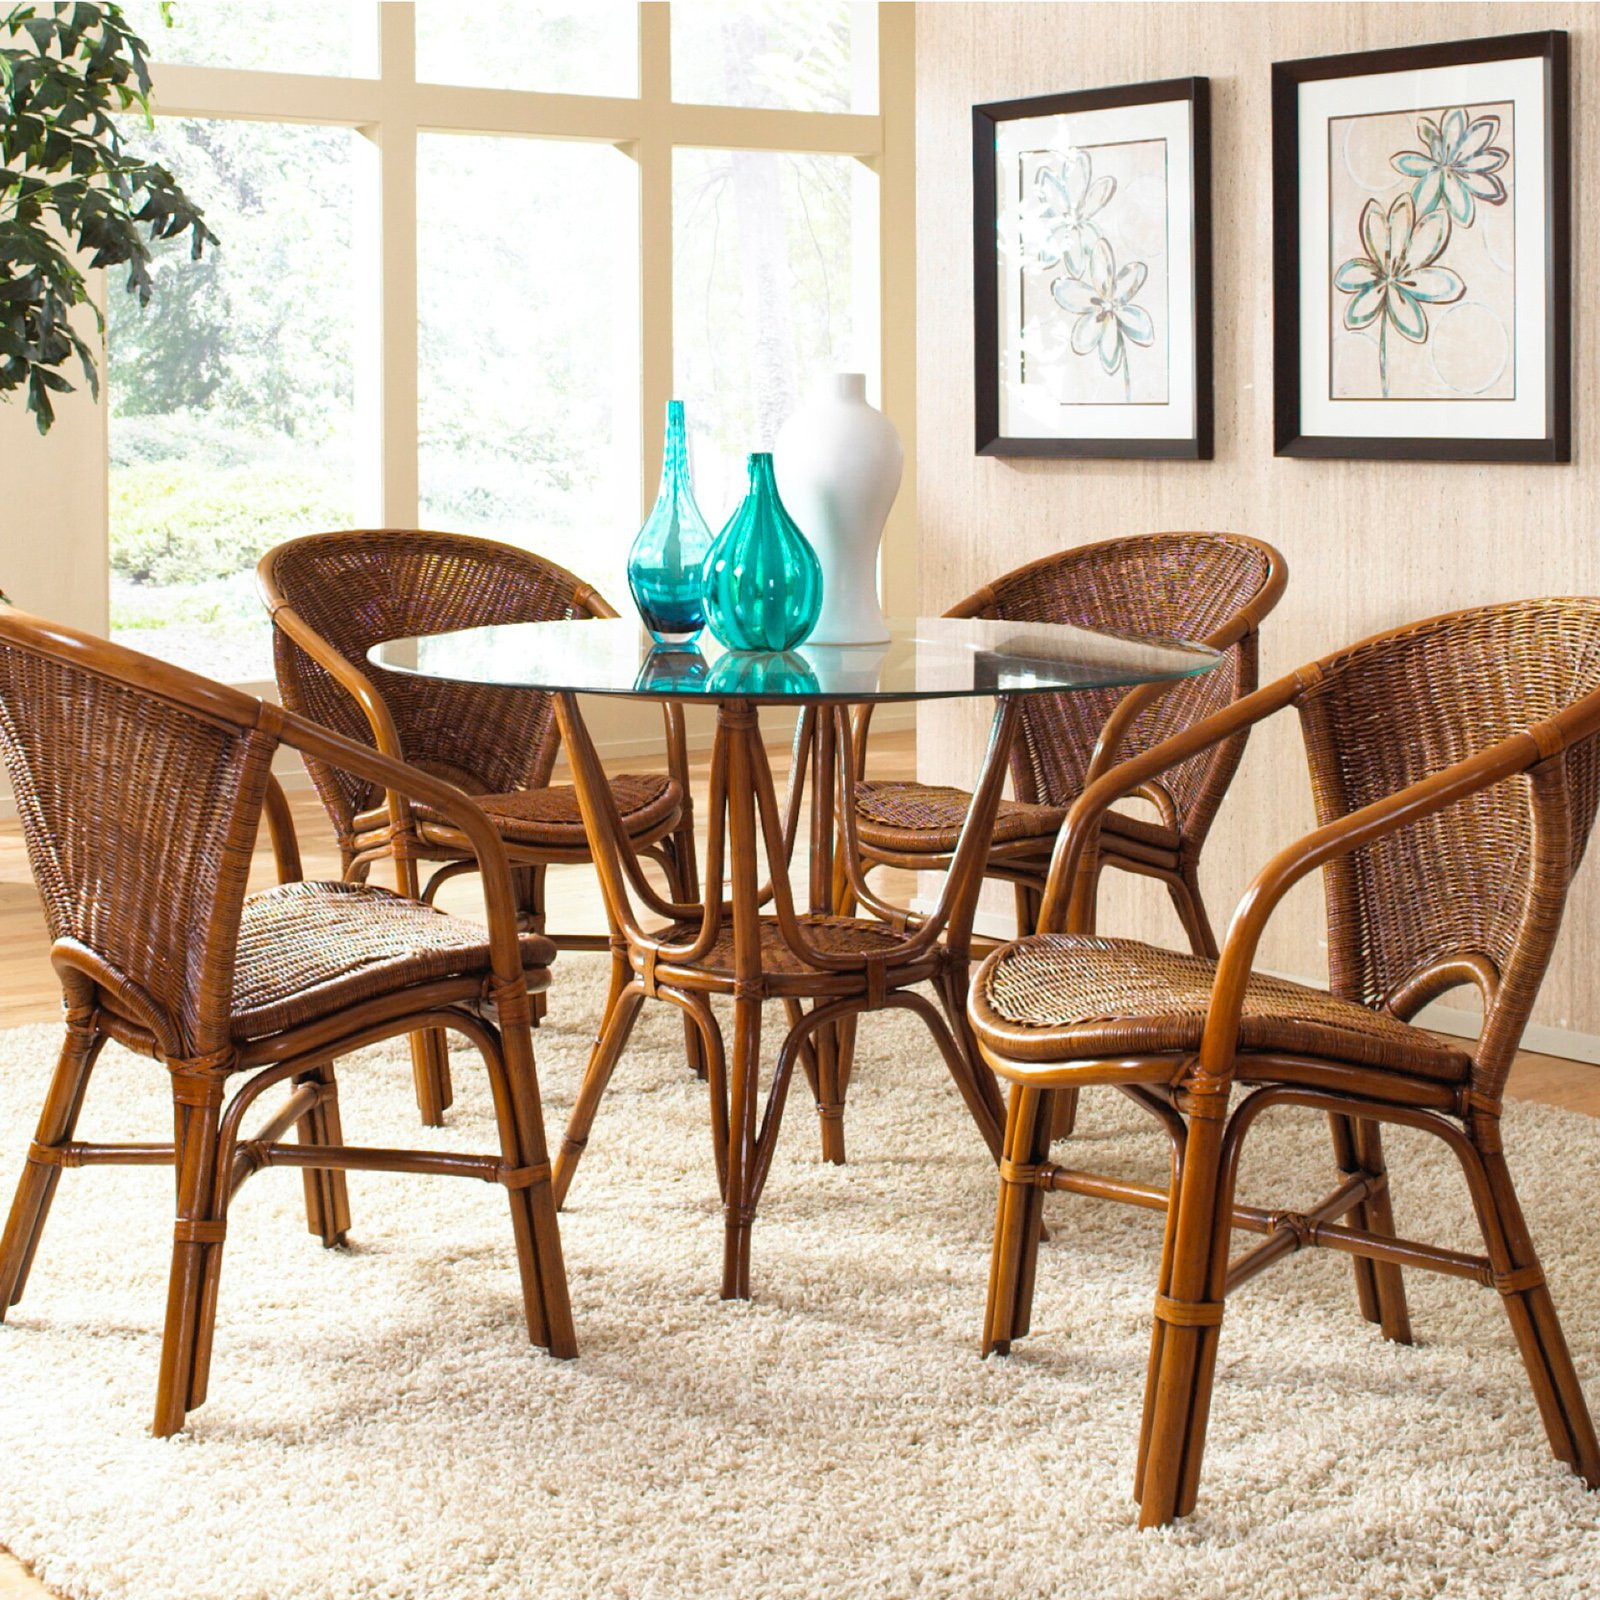 The Best Rattan Dining Set - Best Collections Ever | Home Decor | DIY